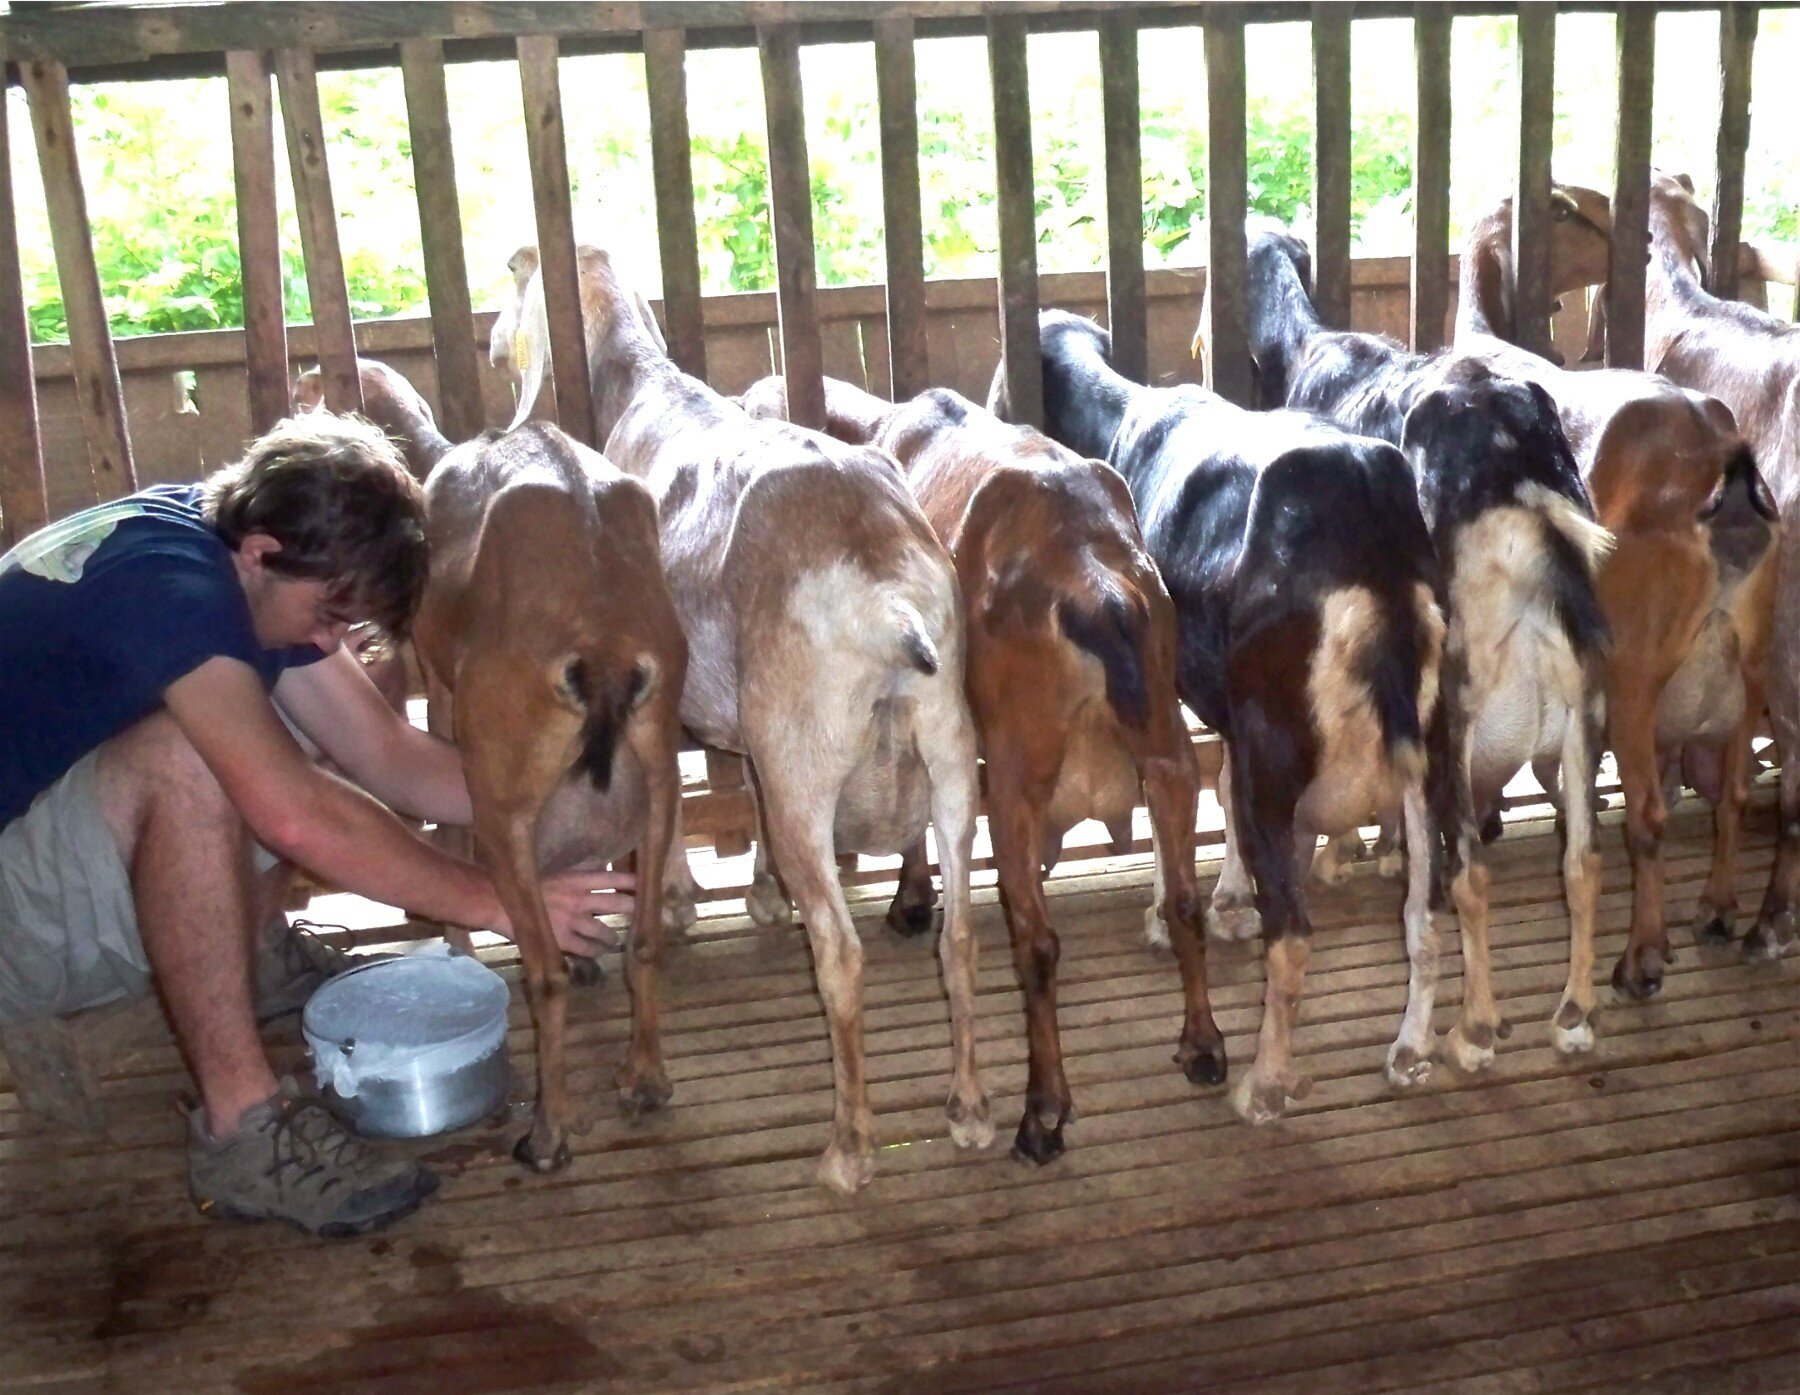 Farm tourists get to join in with real farming activities such as milking goats. Courtesy H. Tacio.